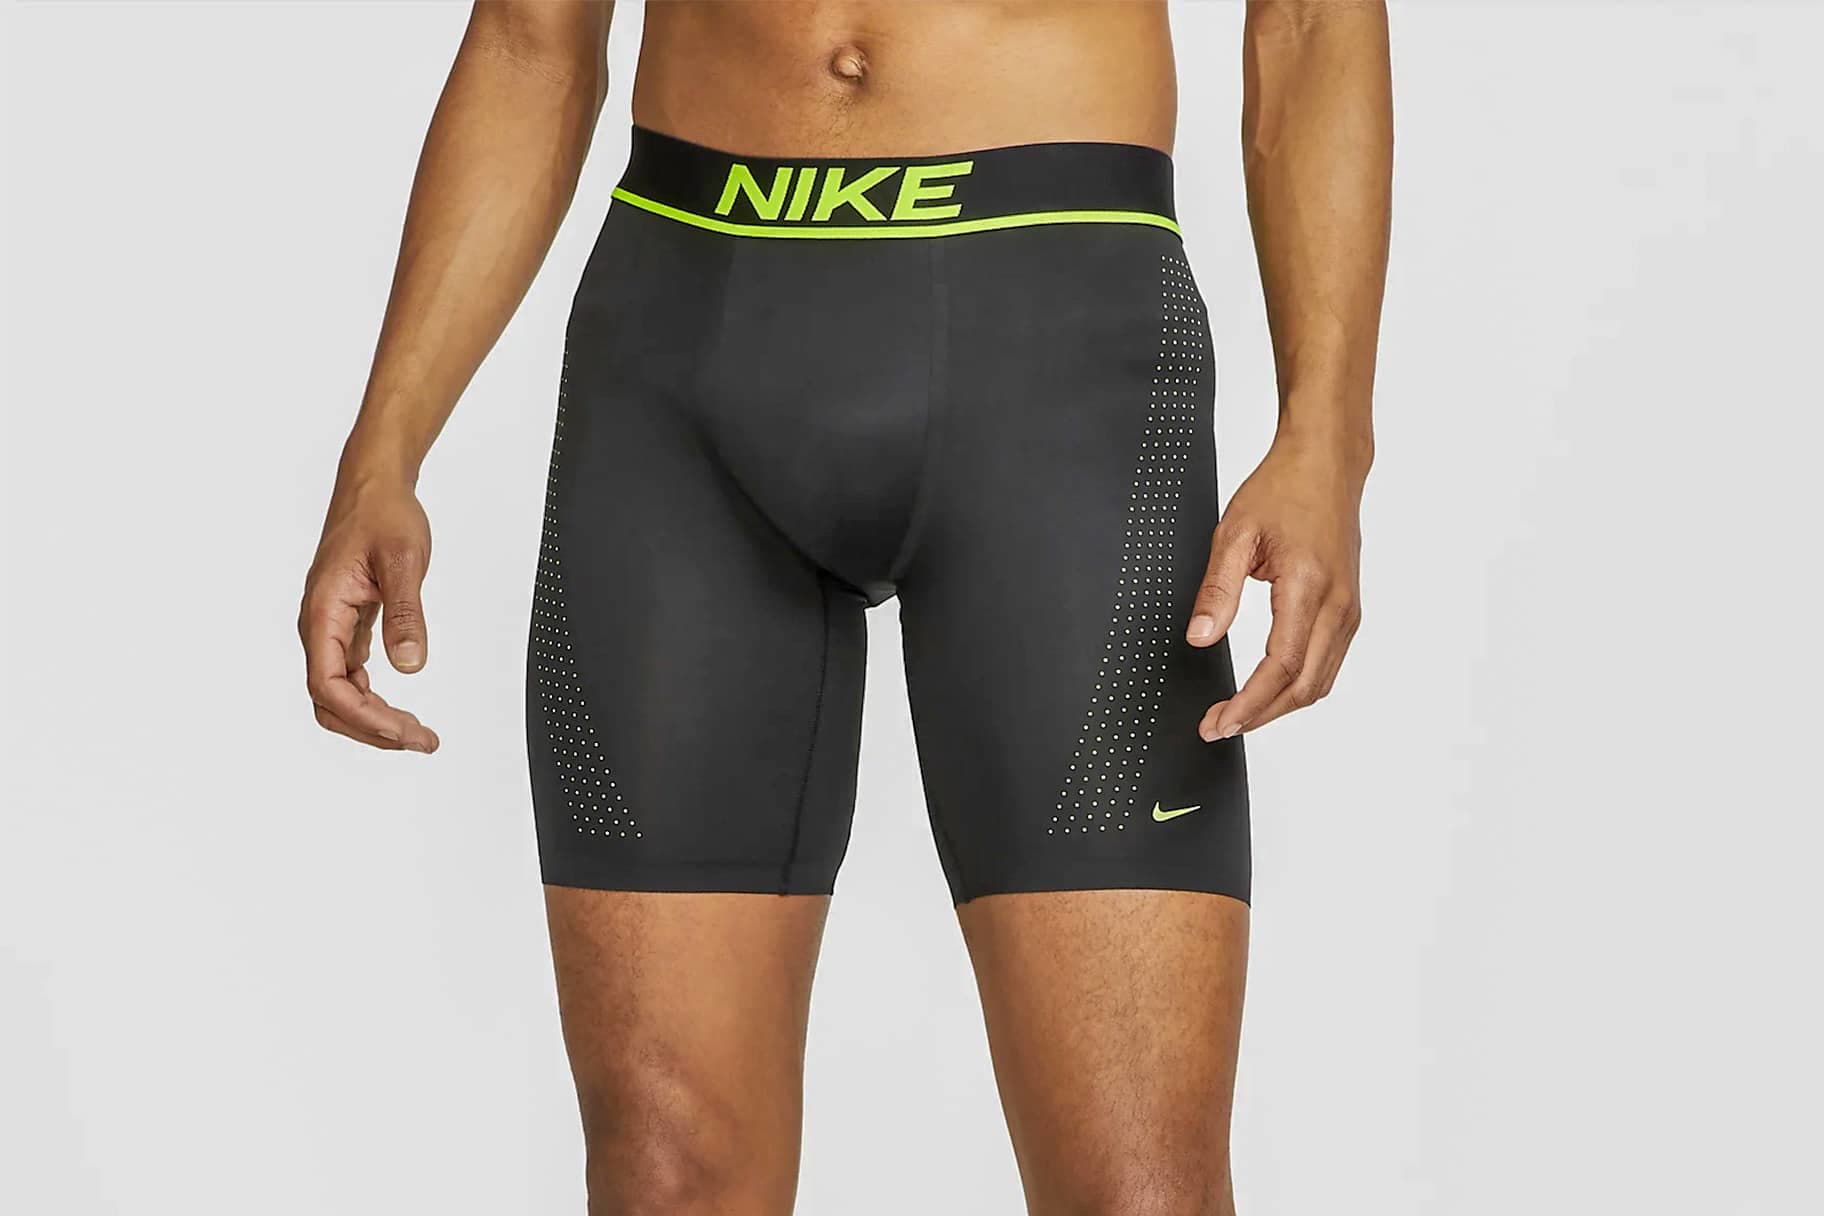 The Best Underwear for Nike.com